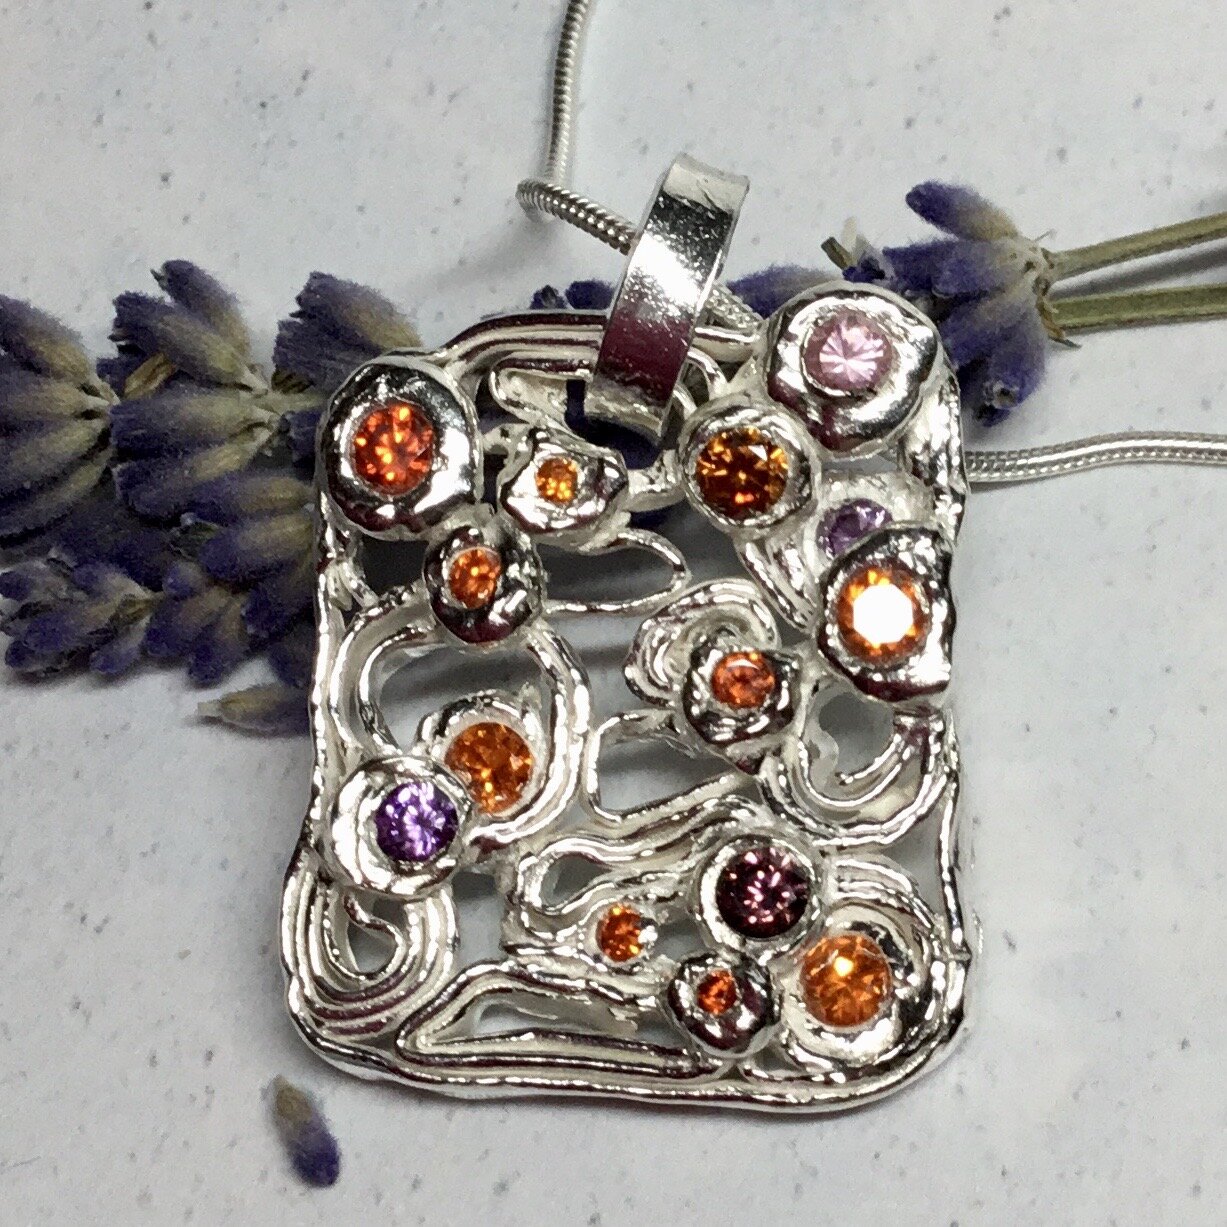 Inspired by the work of Gustav Klimt the artist I have made this pendant using similar coloured CZ stones that Klimt used in his painting The Kiss.
The pendant is handmade from fine silver using a quilling technique.
#Klimt #orange #bronze #silver #p